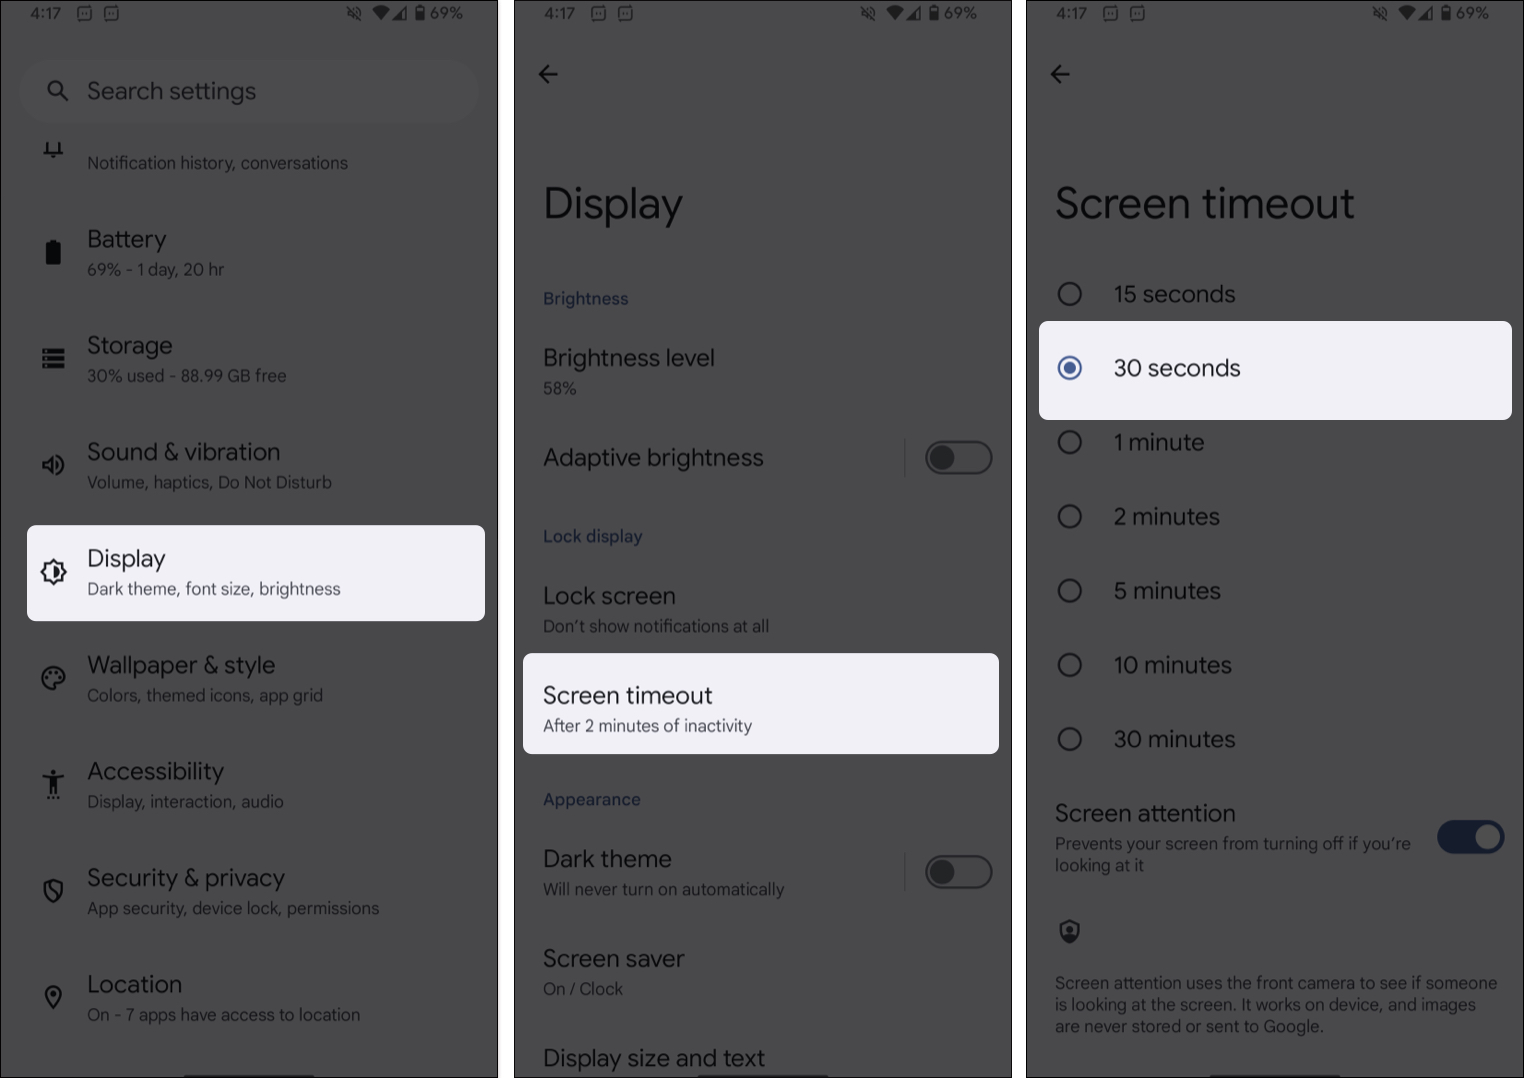 Open settings, go to display, choose screen timeout, select duration